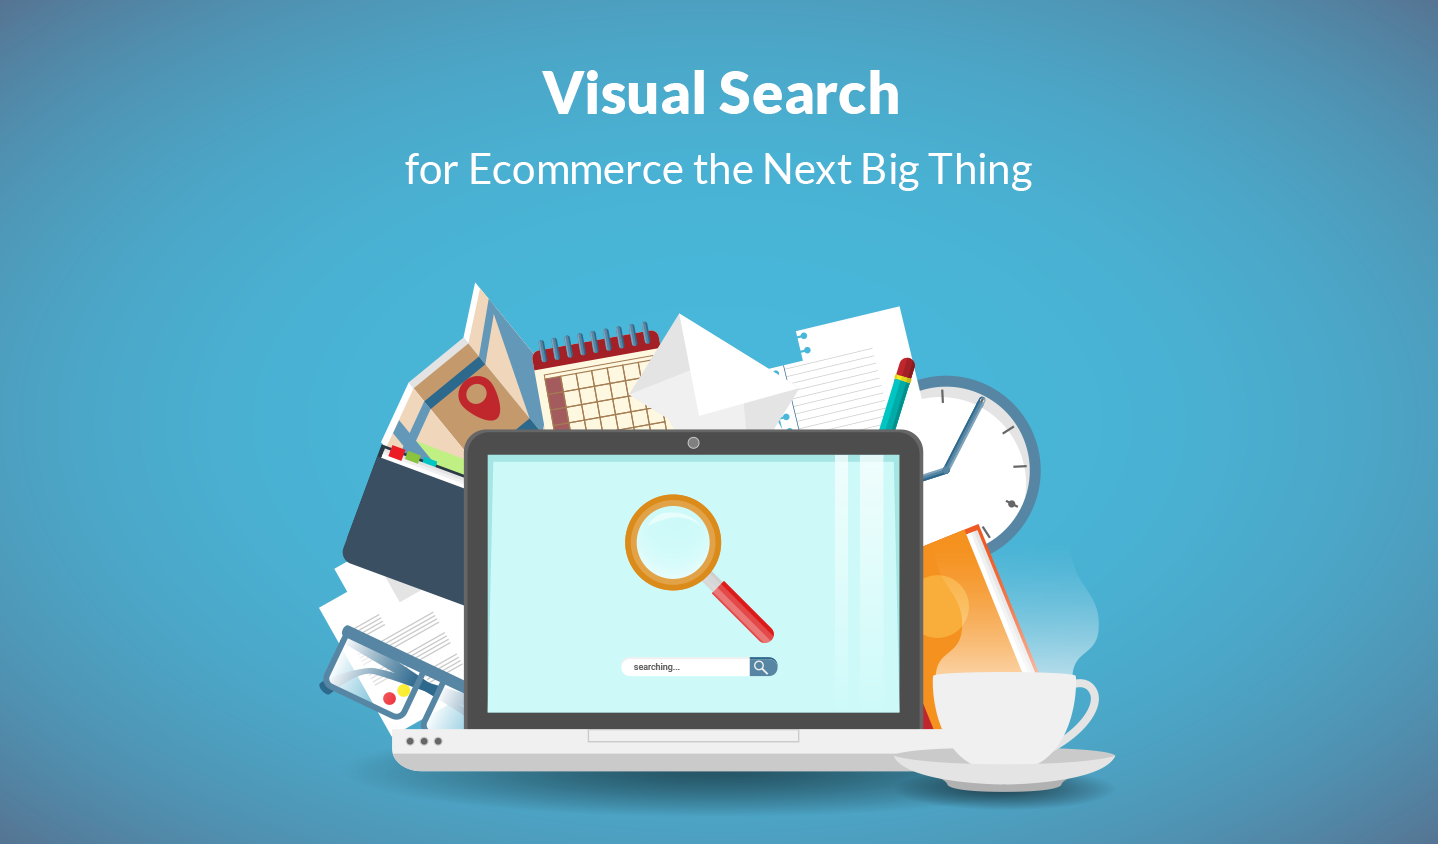 Why is Visual Search for Ecommerce the Next Big Thing